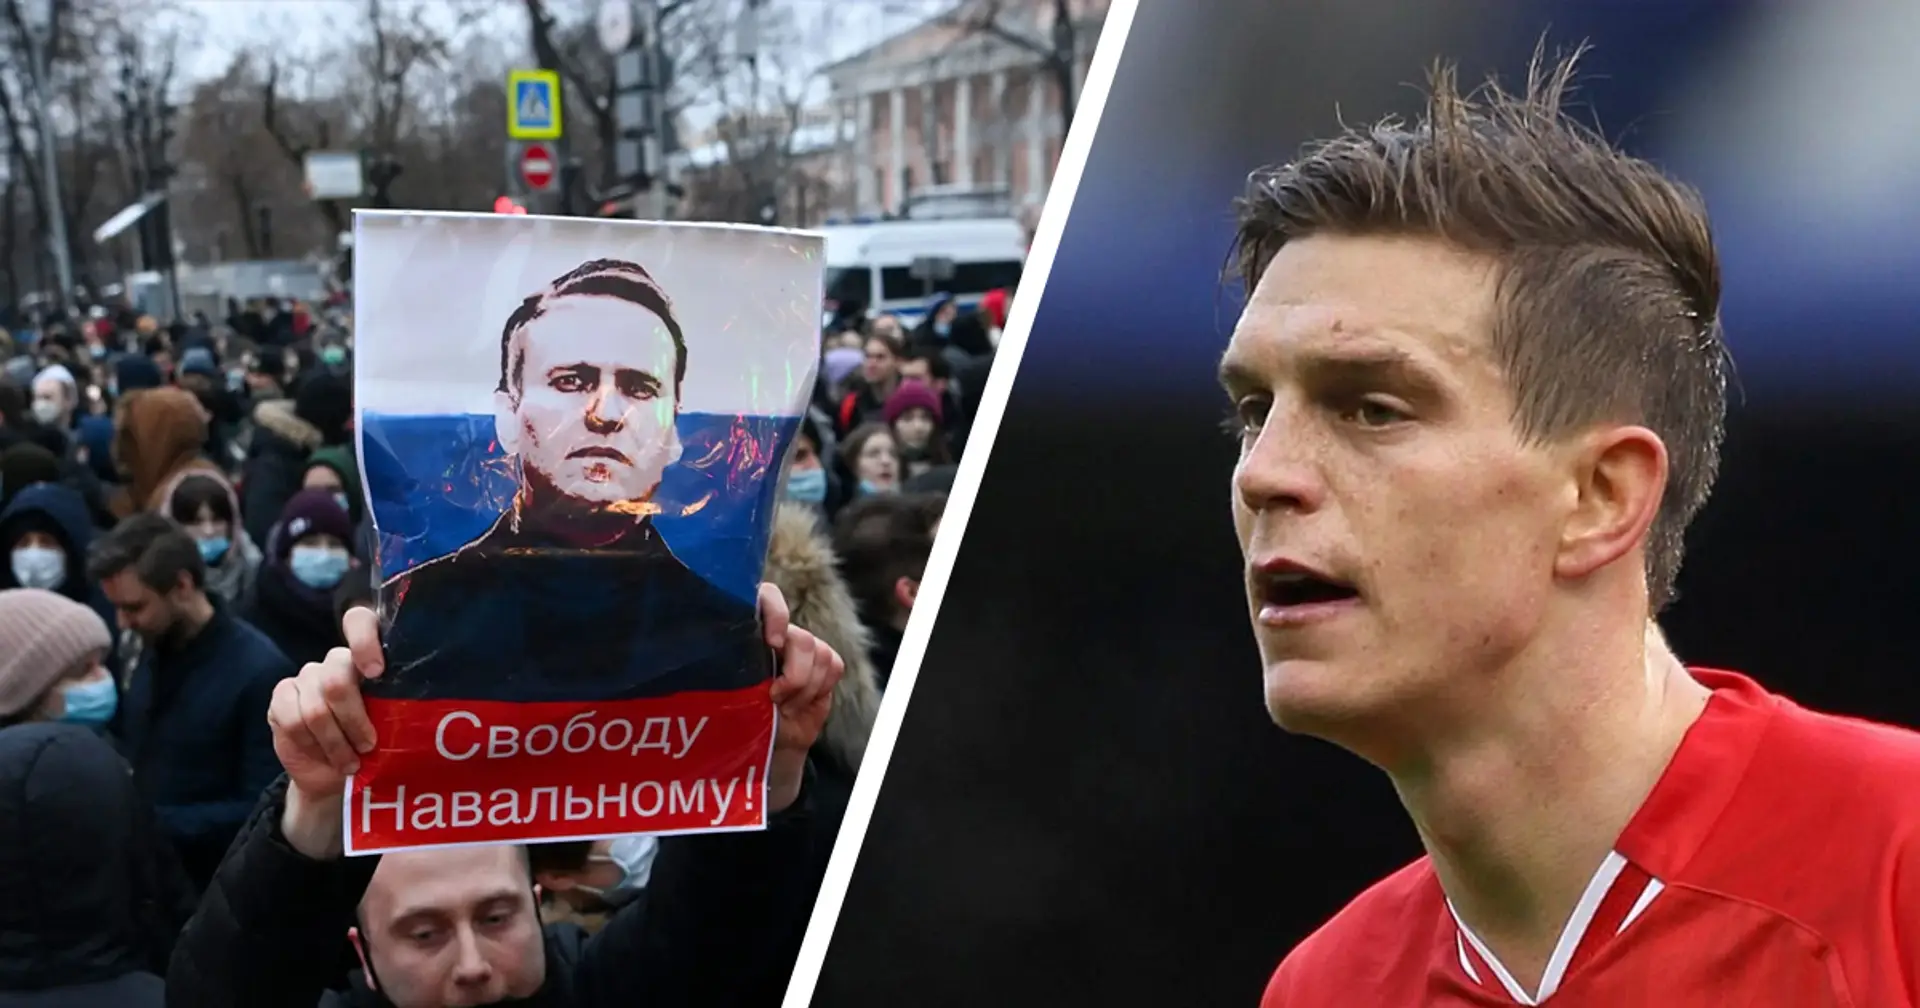 Daniel Agger's namesake detained in Russia after attending mass demonstration